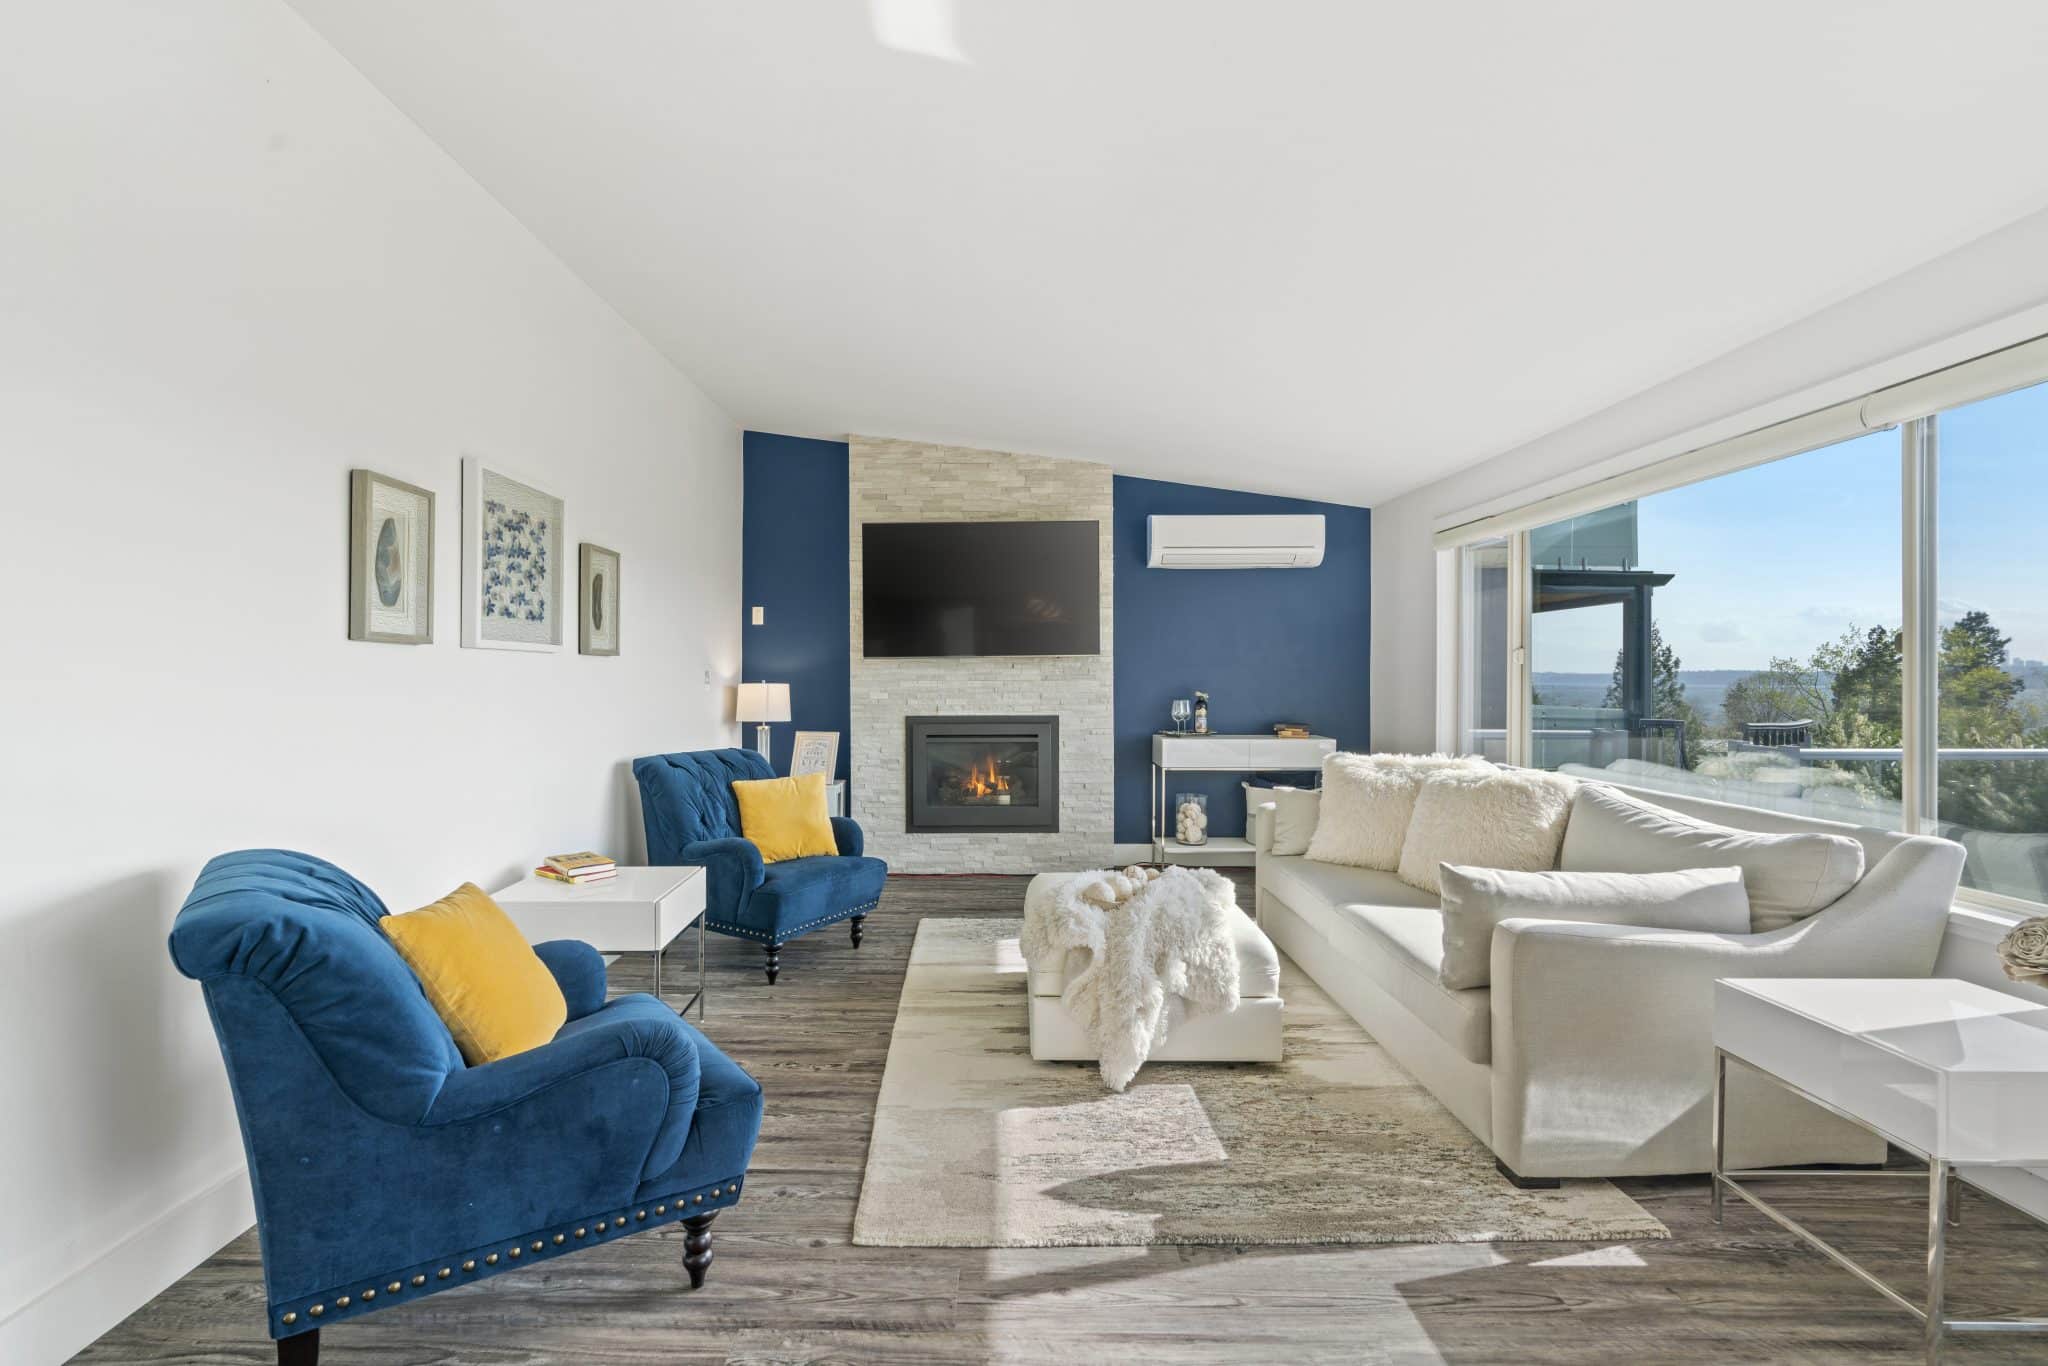 A blue accent wall makes this small living room appear larger.